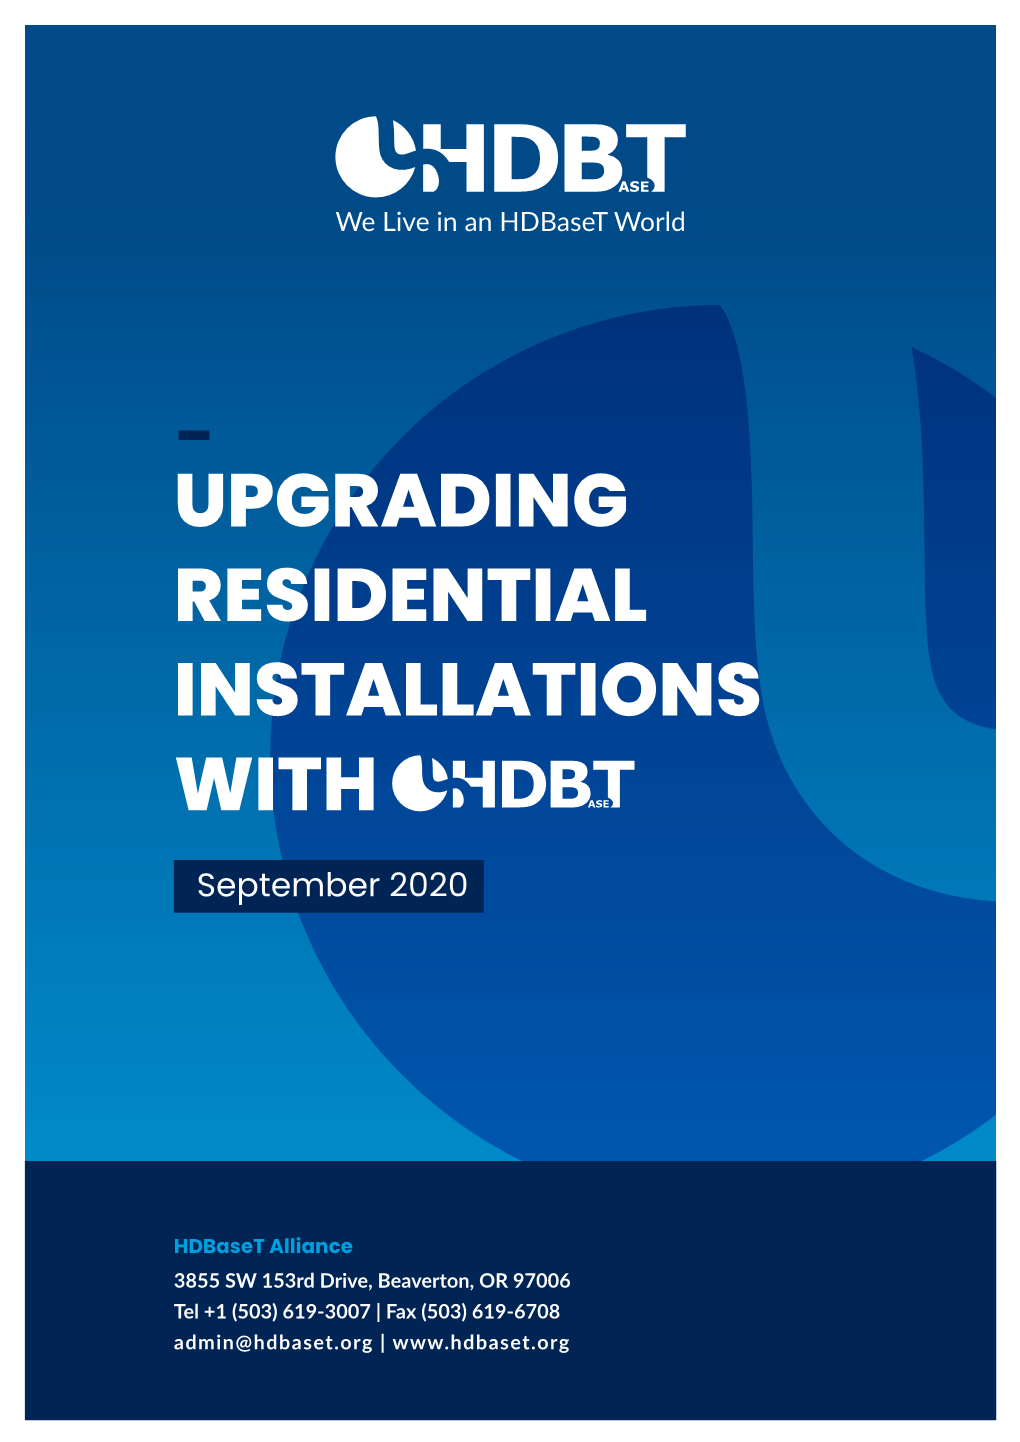 UPGRADING RESIDENTIAL INSTALLATIONS with September 2020